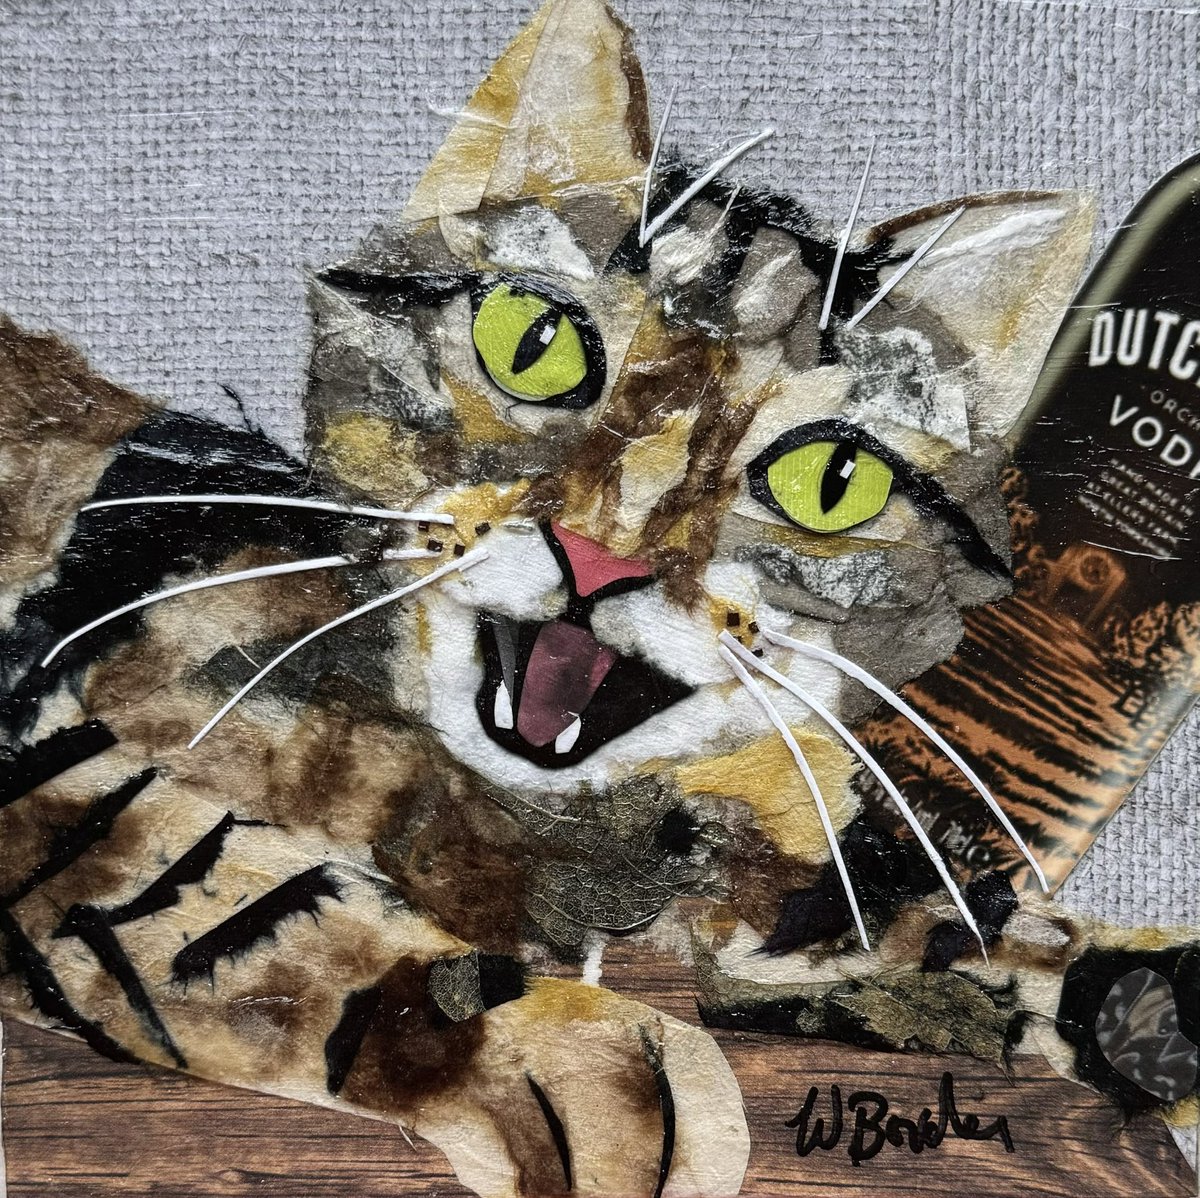 Raffle! Donate to any animal rescue/sanctuary and show me your receipt in replies to this post. For every $5 USD, you’ll receive an entry to win this 6x6” original collage of @PickliciousF knocking over some Dutch Barn Vodka. Ends April 30, 2024 at 8pm New York time. ❤️